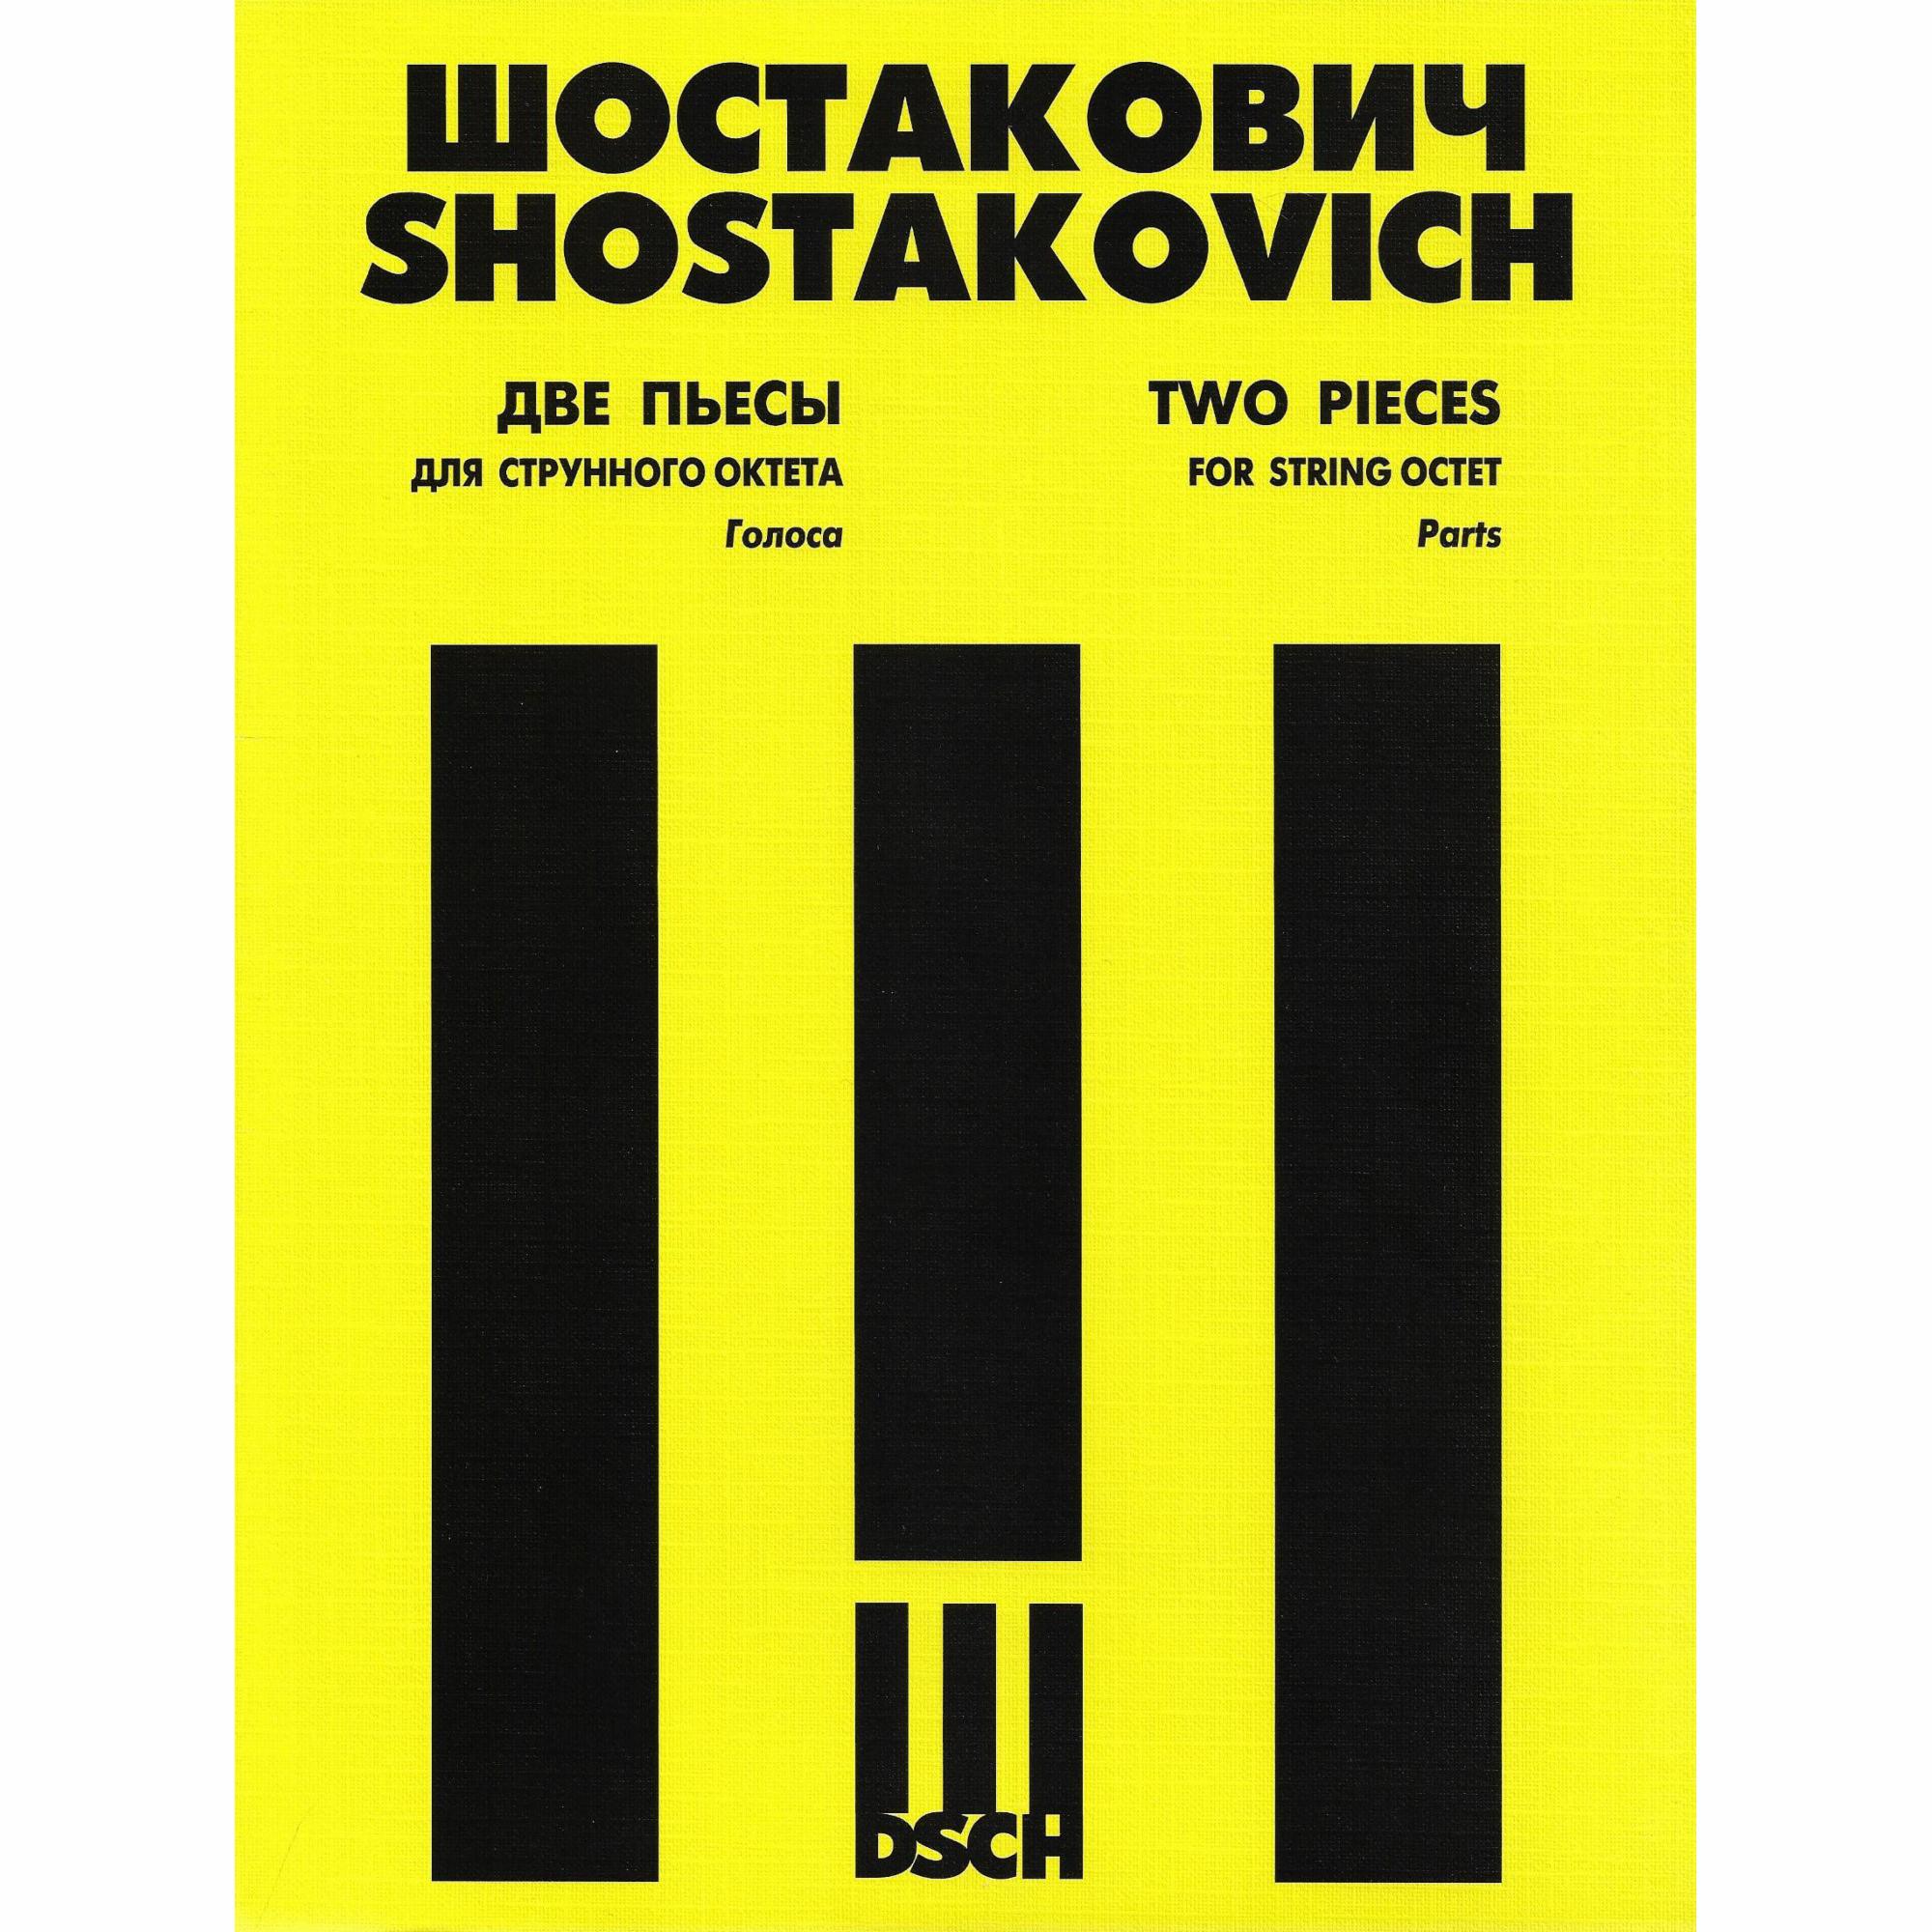 Shostakovich -- Two Pieces, Op. 11 for String Octet